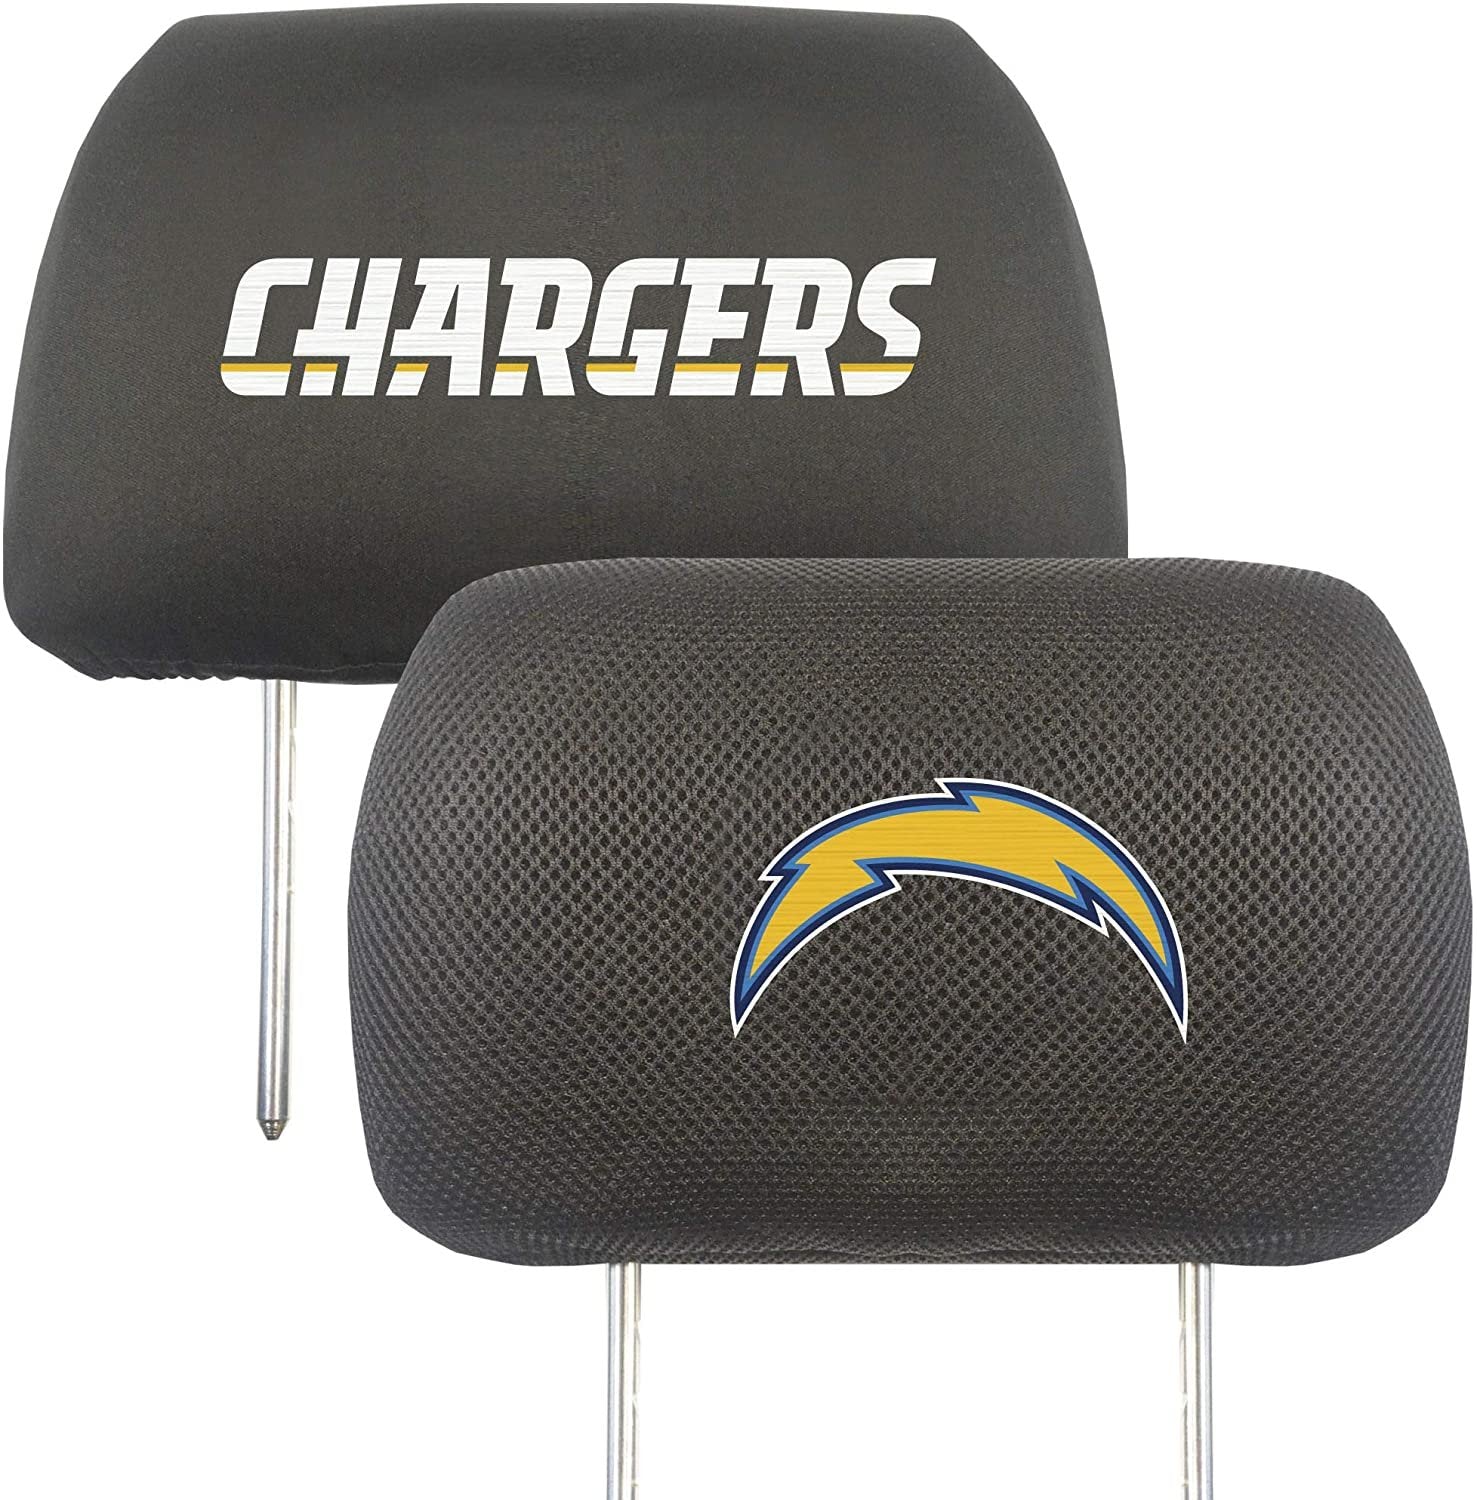 Los Angeles Chargers Pair of Premium Auto Headrest Covers, Black Elastic, Embroidered, 14x10 Inch